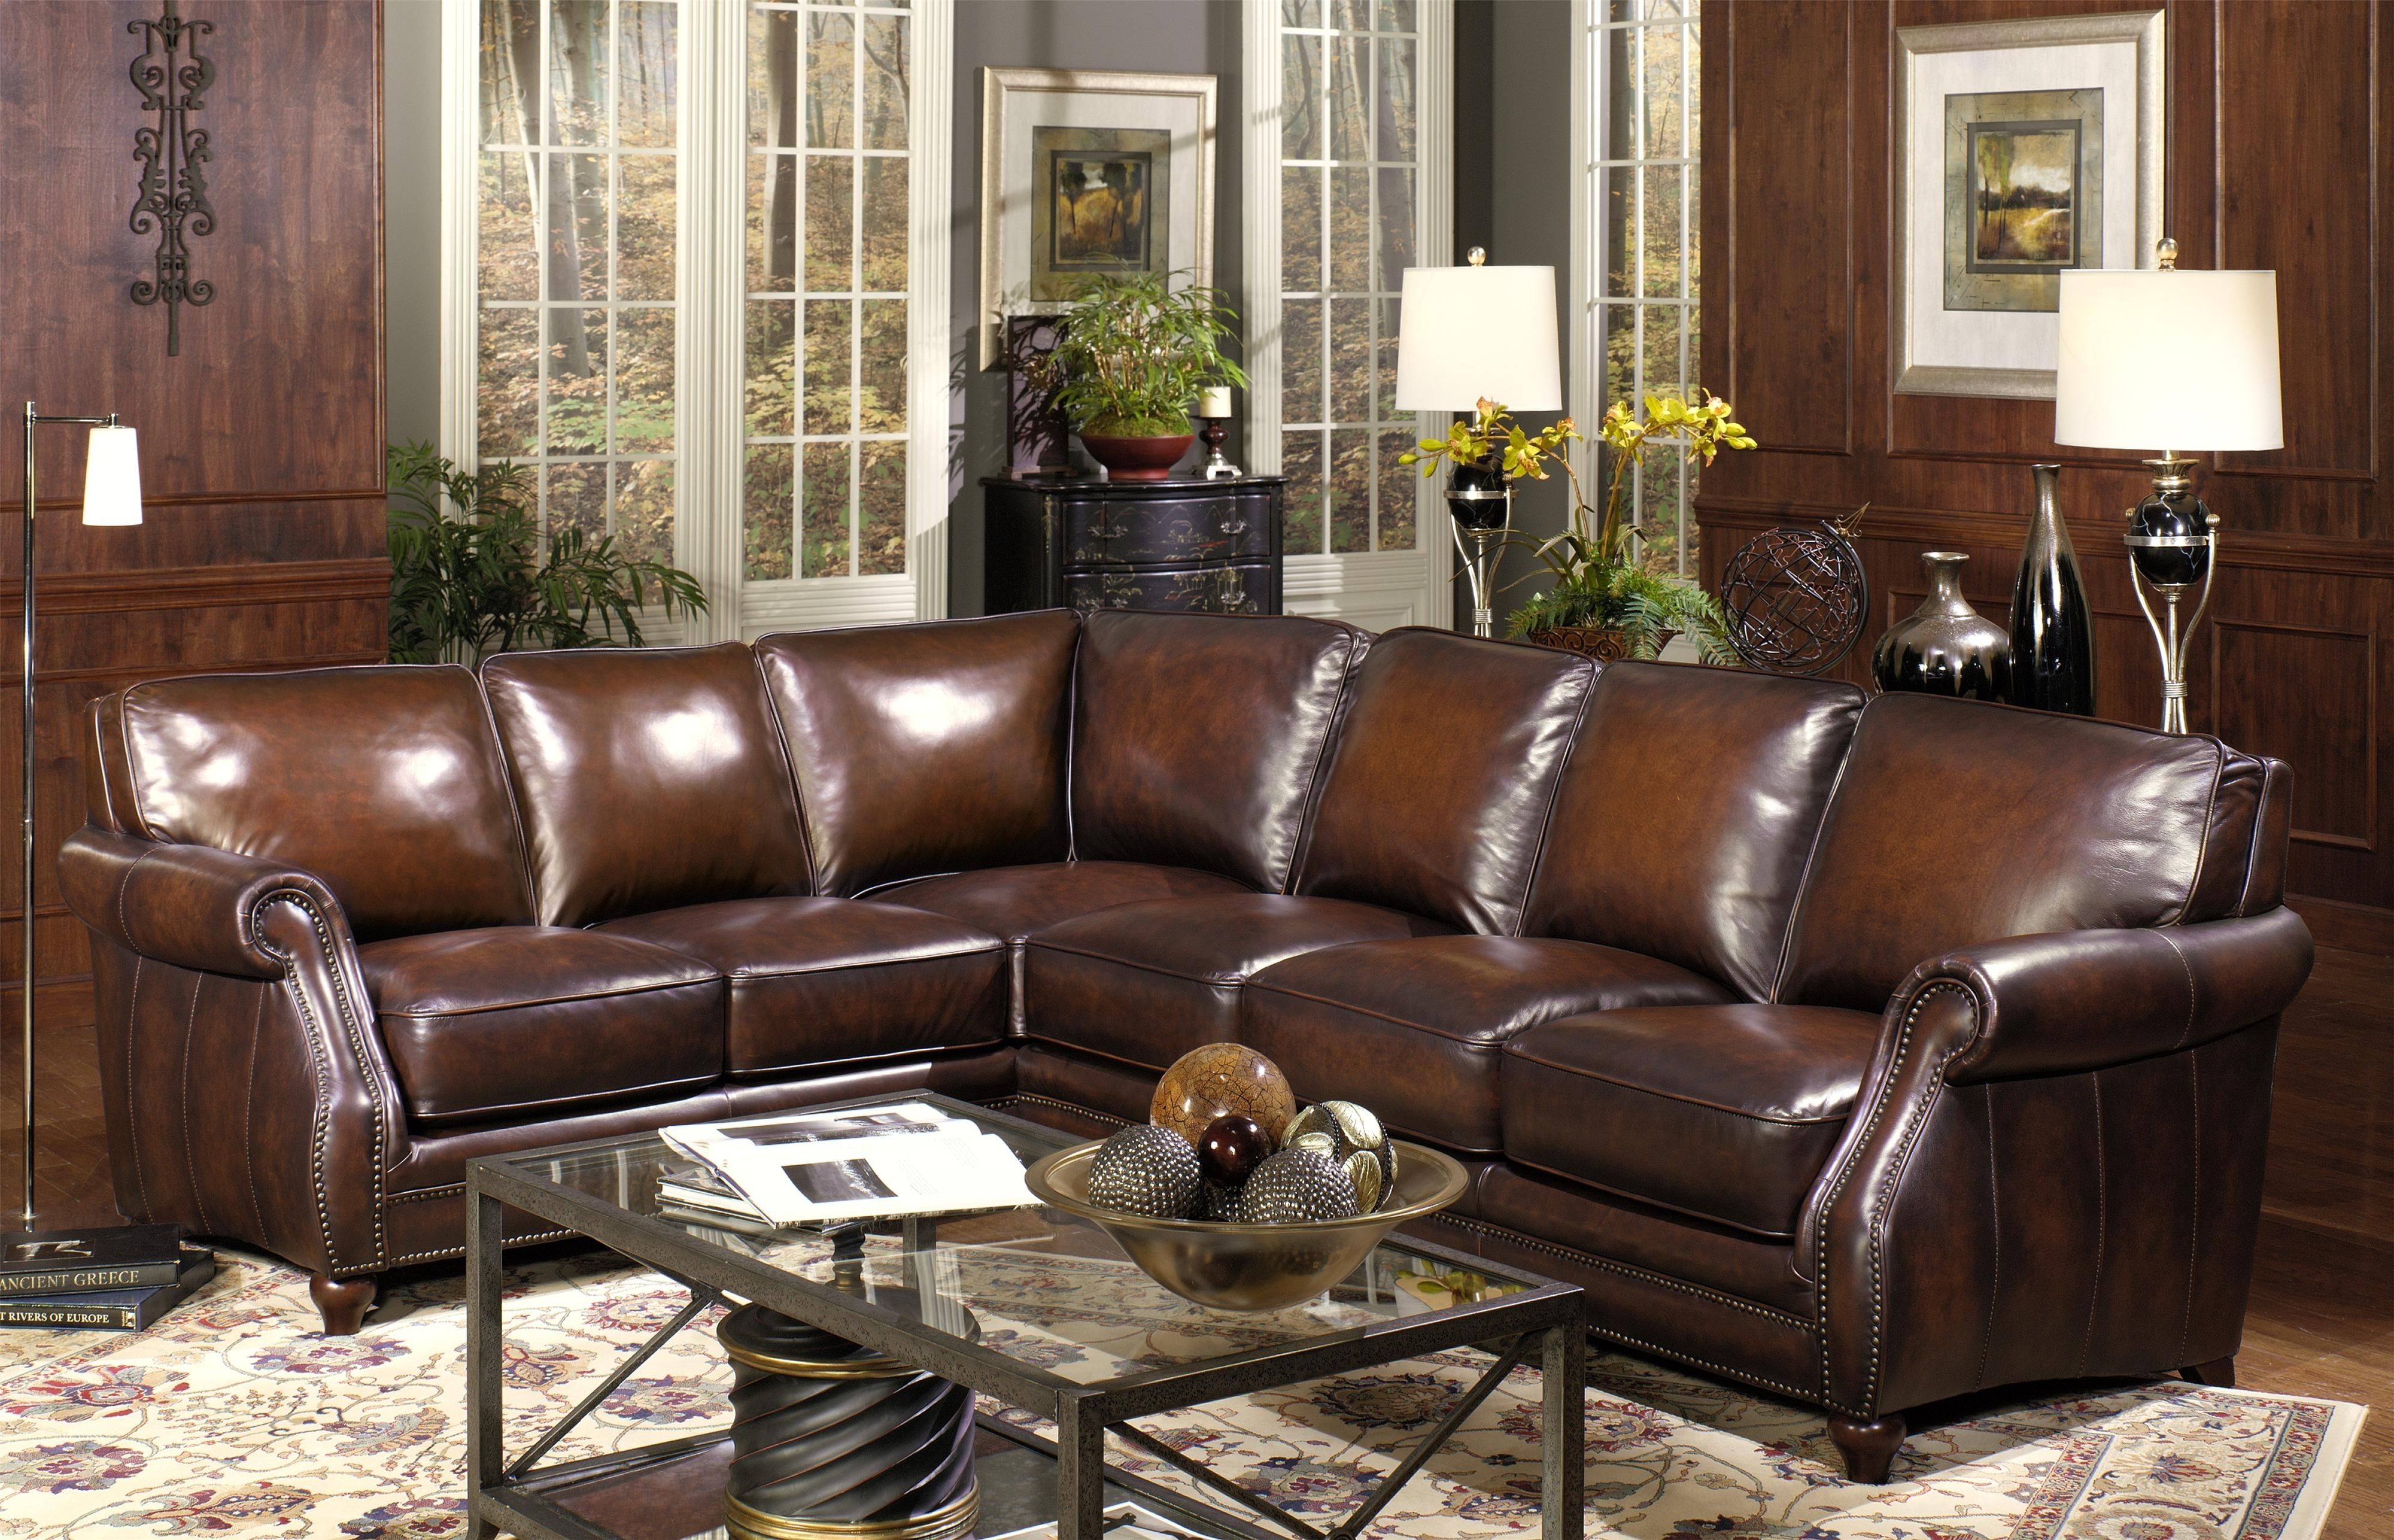 High Quality Leather Sectional Sofas – Fjellkjeden With Quality Sectional Sofas (View 1 of 10)